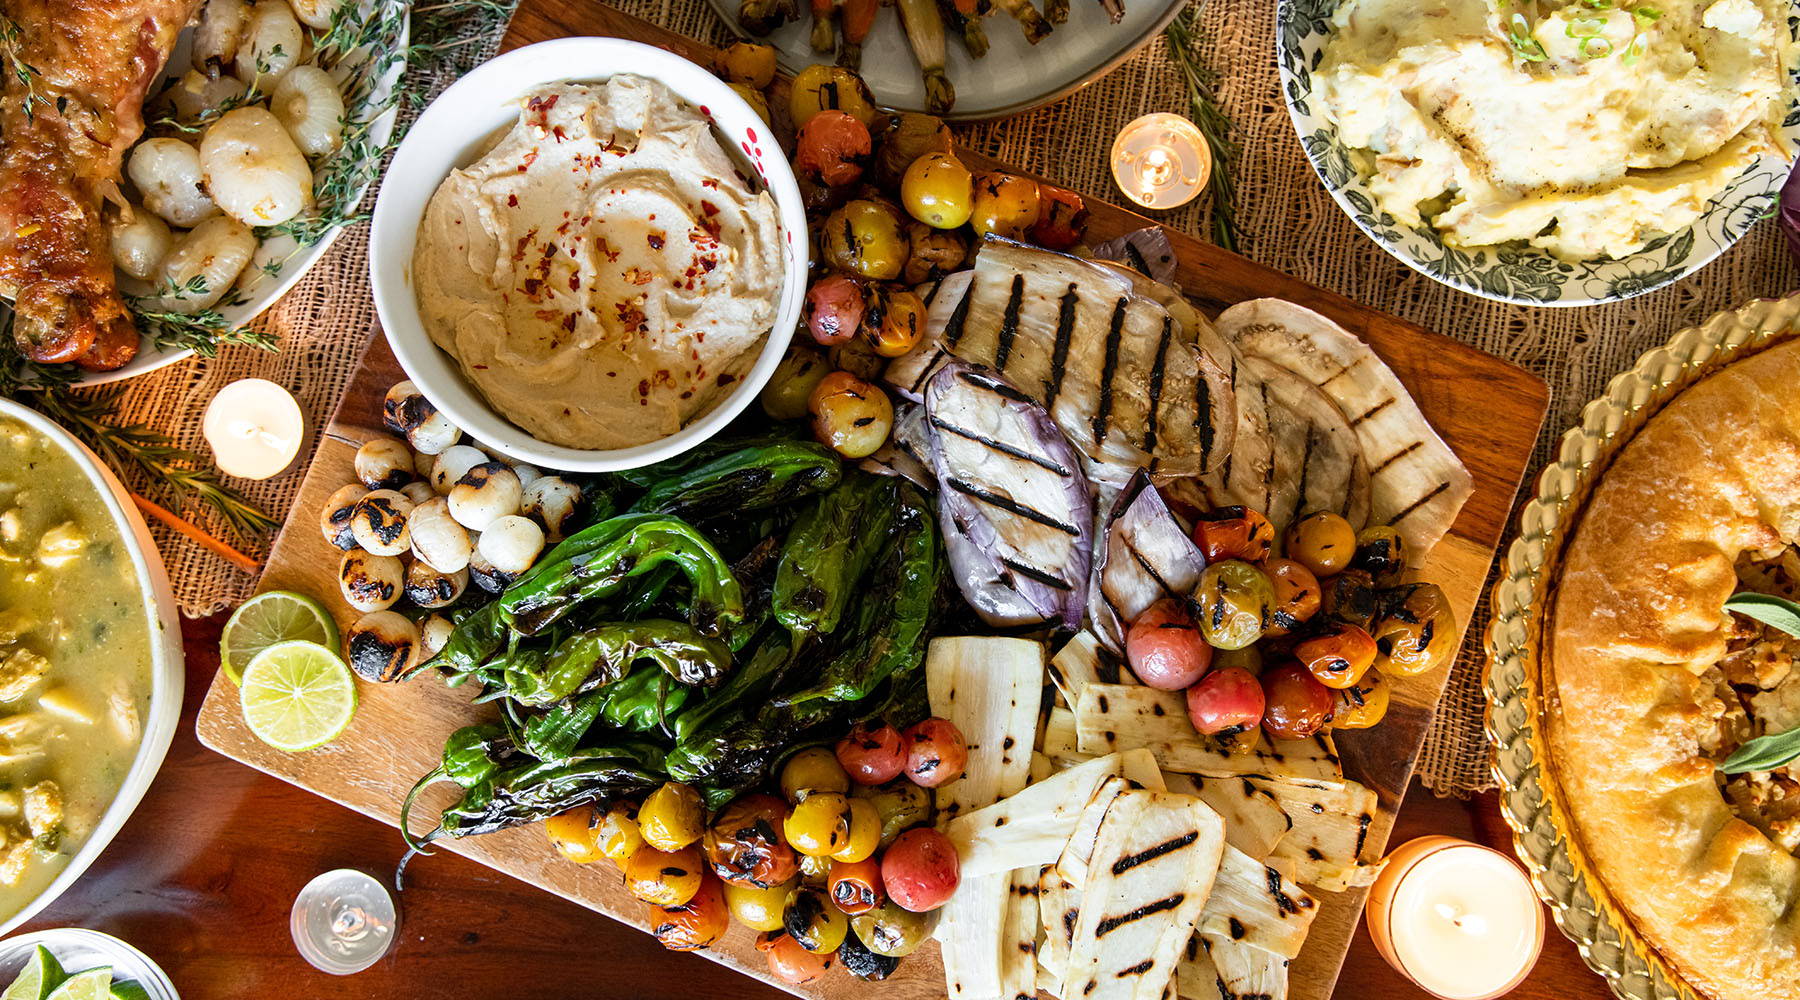 Image of Hummus and Vegetable platter